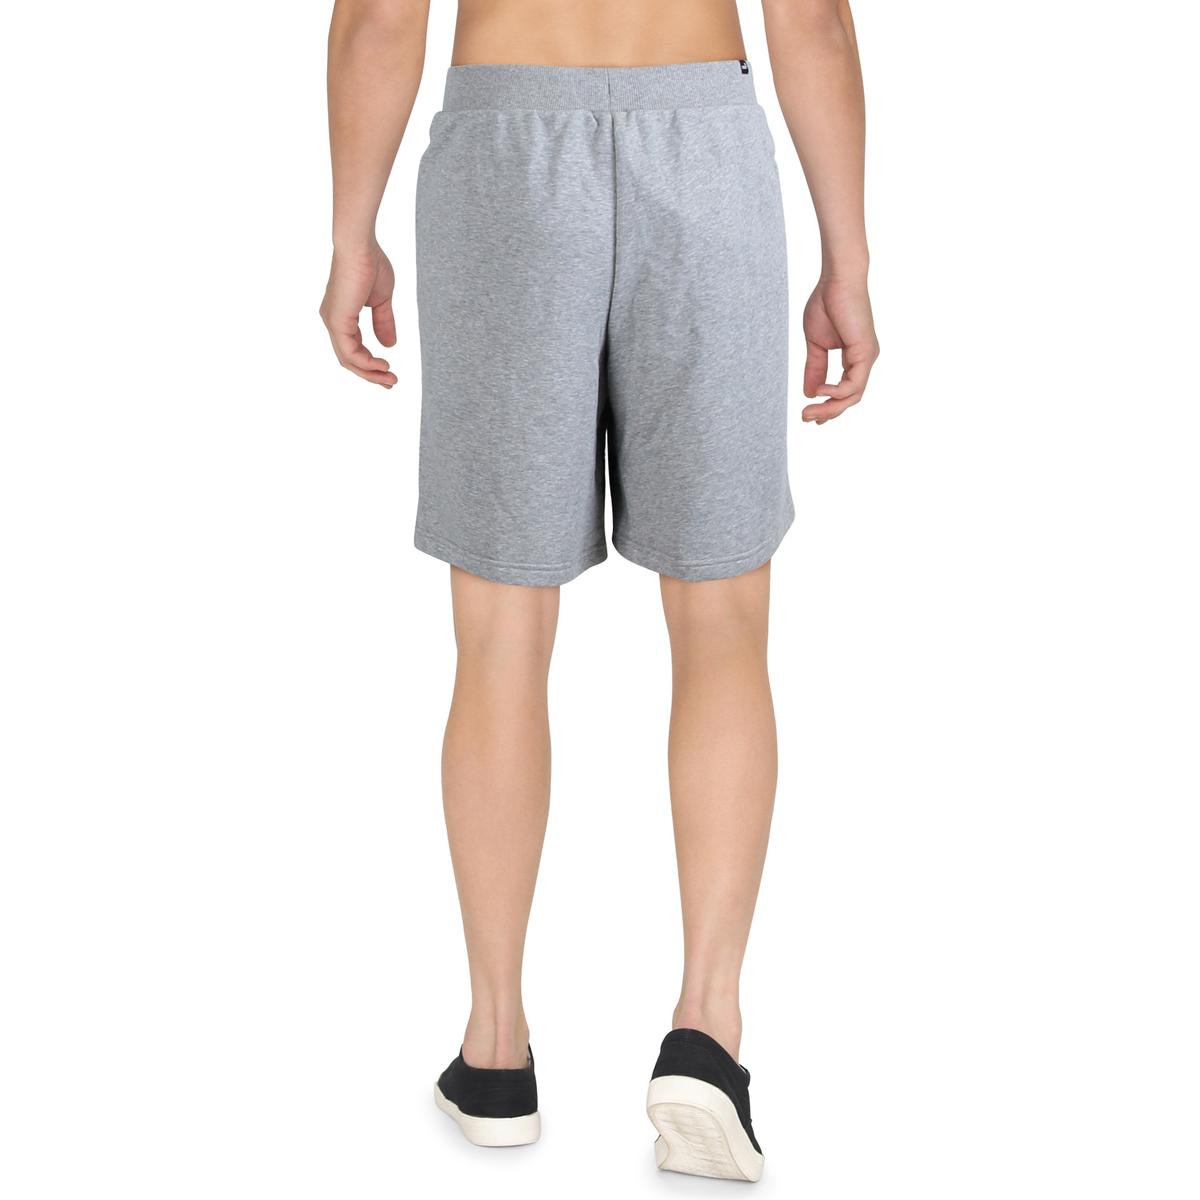 46  Puma workout shorts for Six Pack